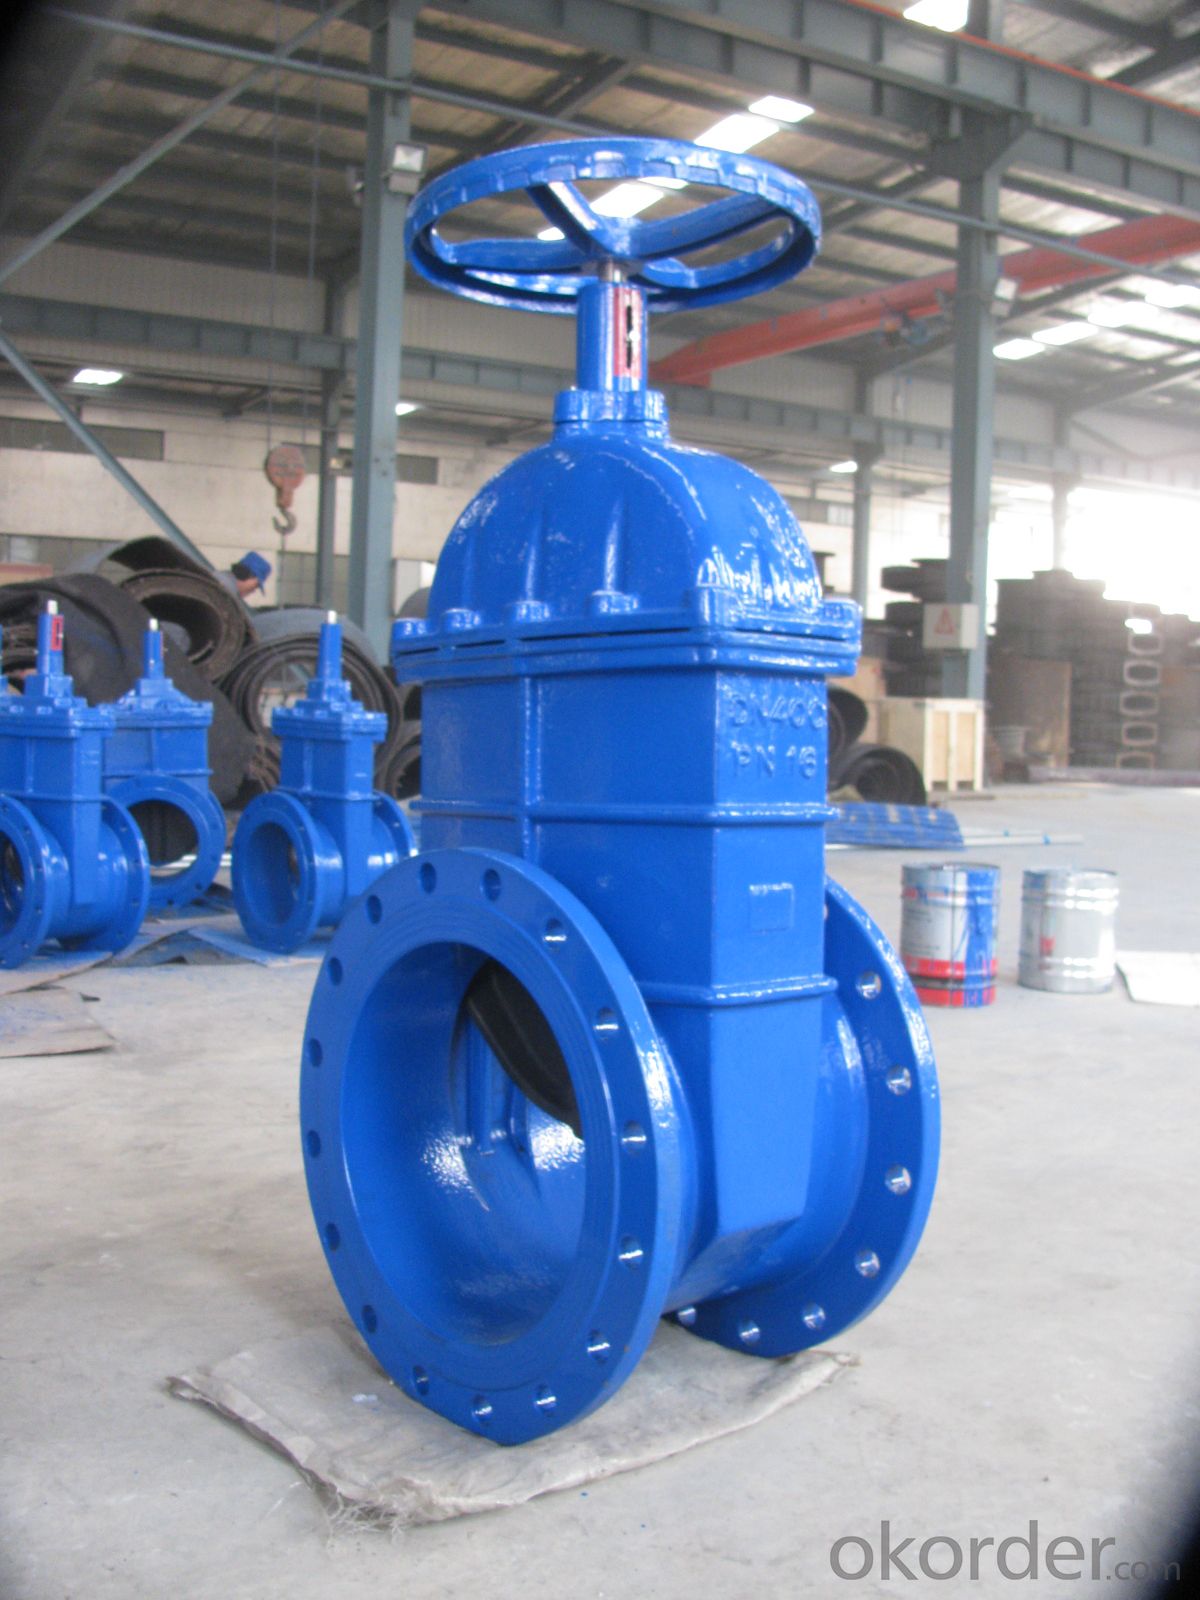 DUCTILE IRON GATE VALVE design and manufacture real-time quotes, last